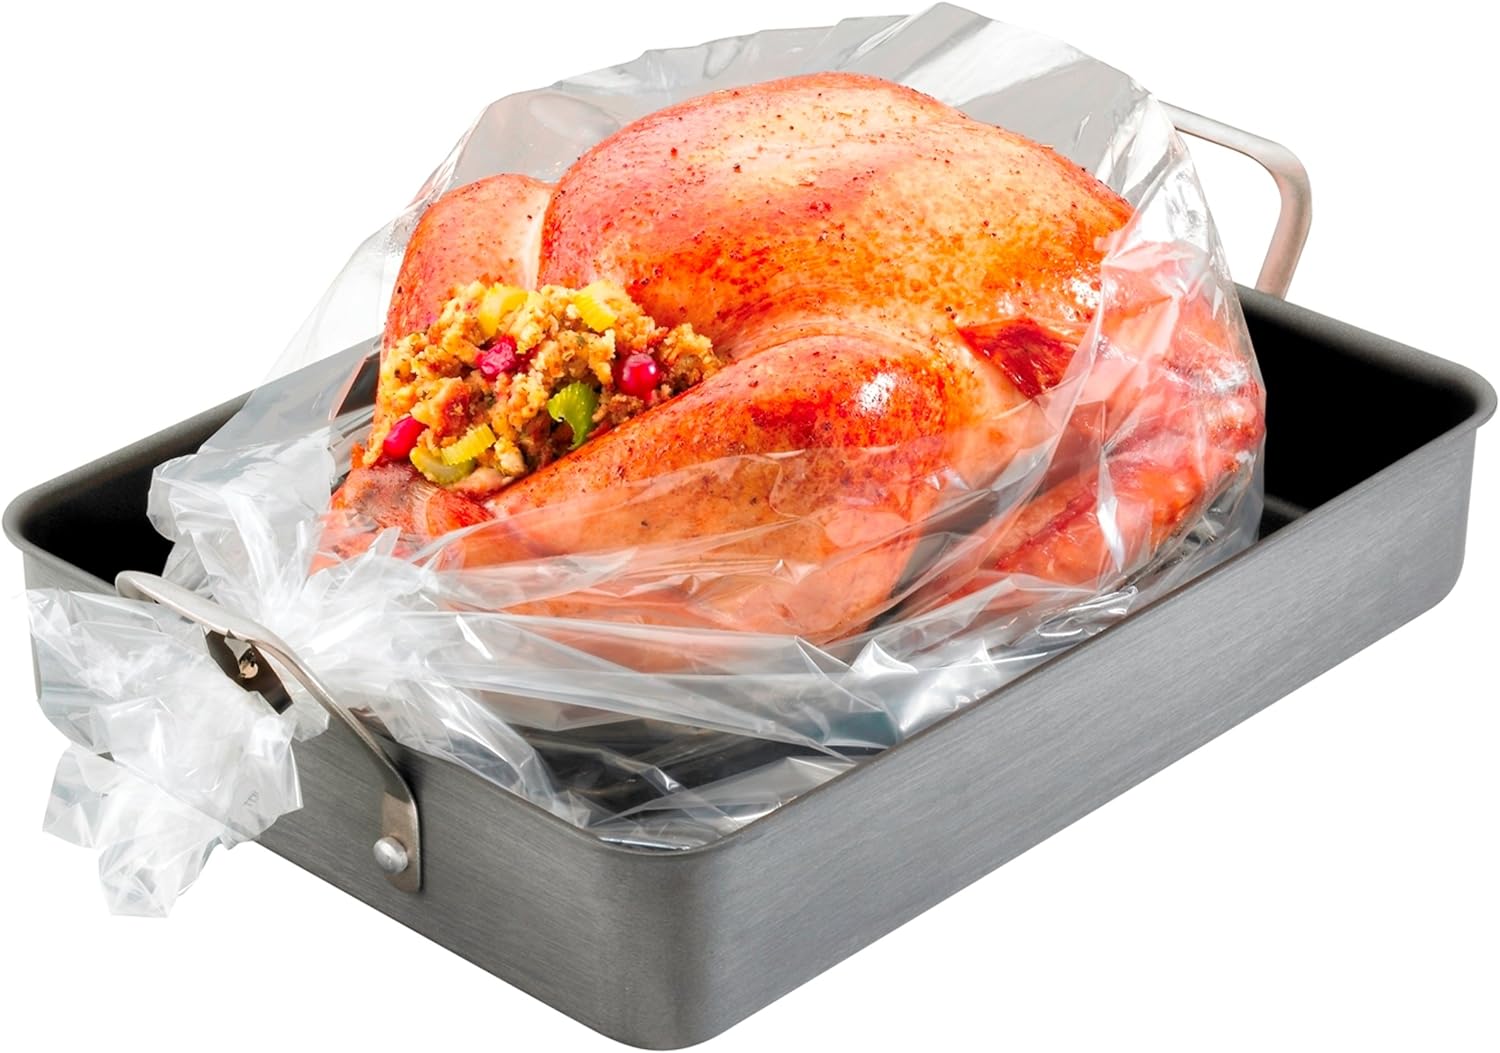 https://recipes.net/wp-content/uploads/2023/12/how-to-cook-a-turkey-in-bag-1702260685.jpg